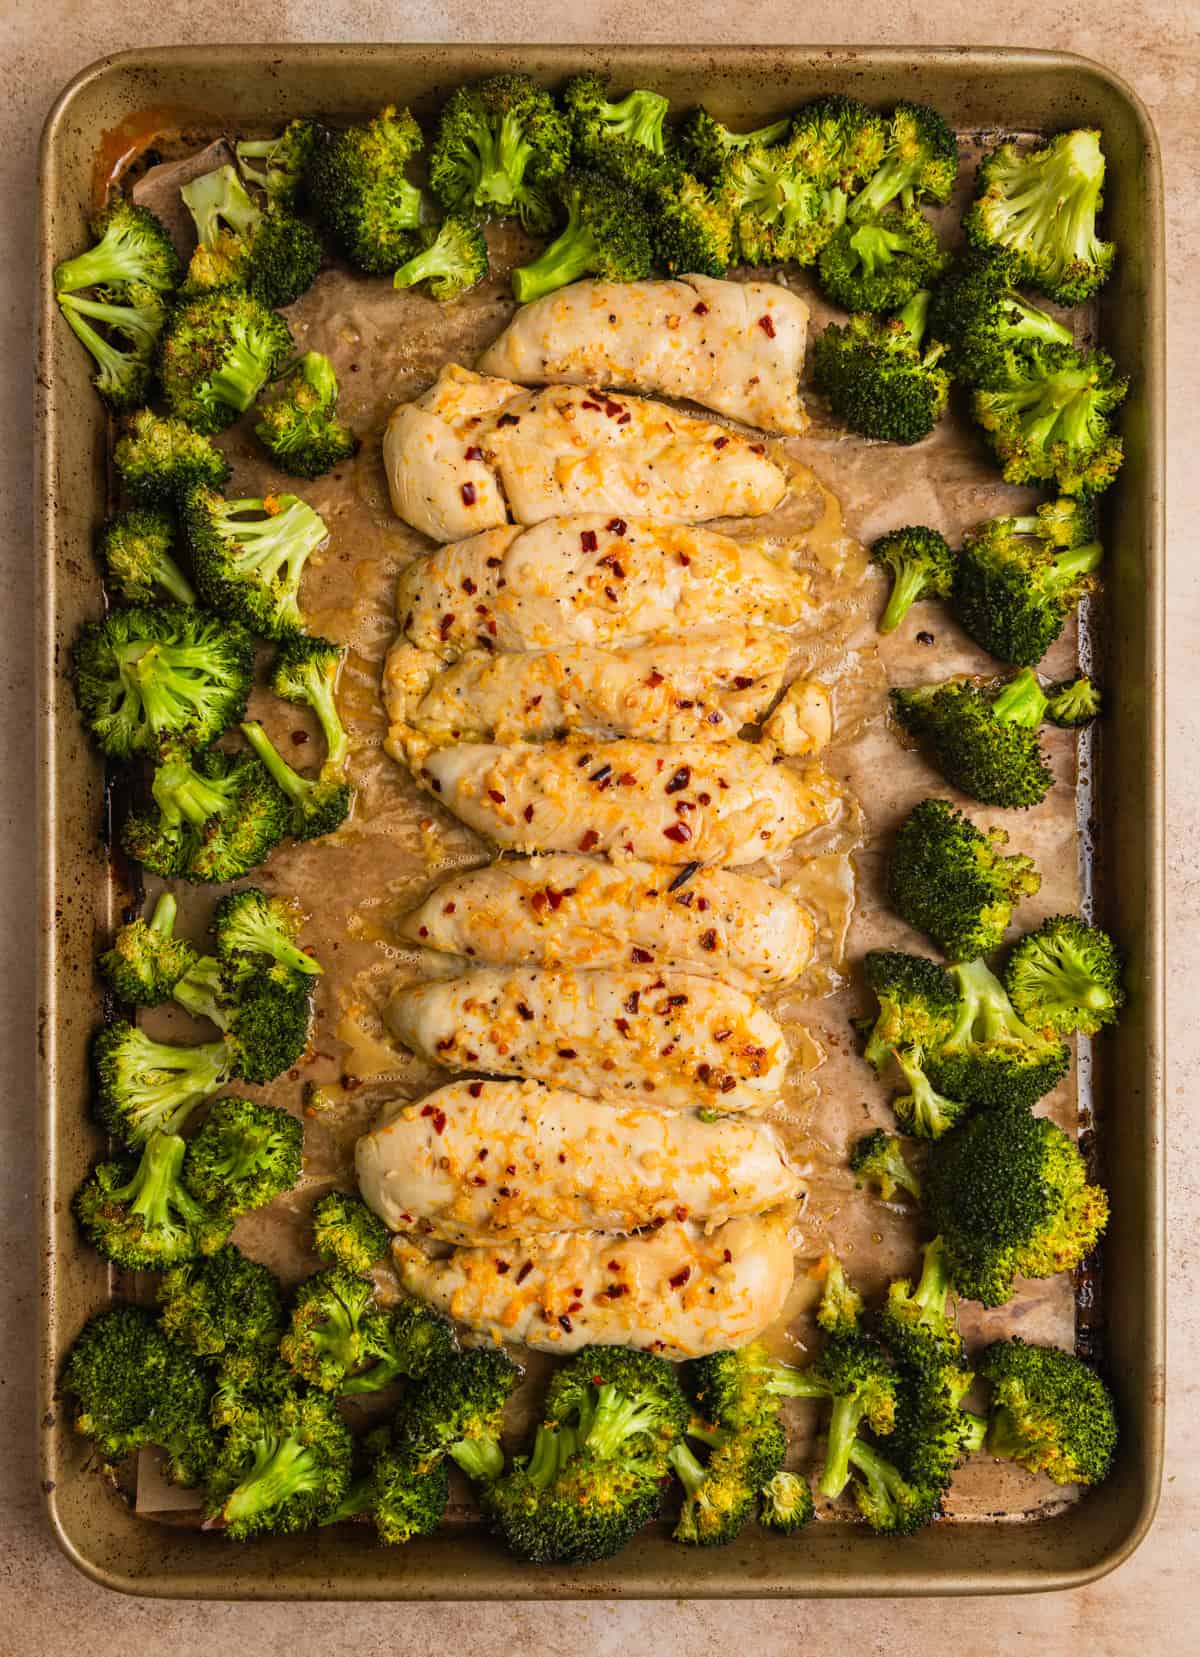 Baked orange chicken sheet pan dinner after being baked with cooked broccoli.